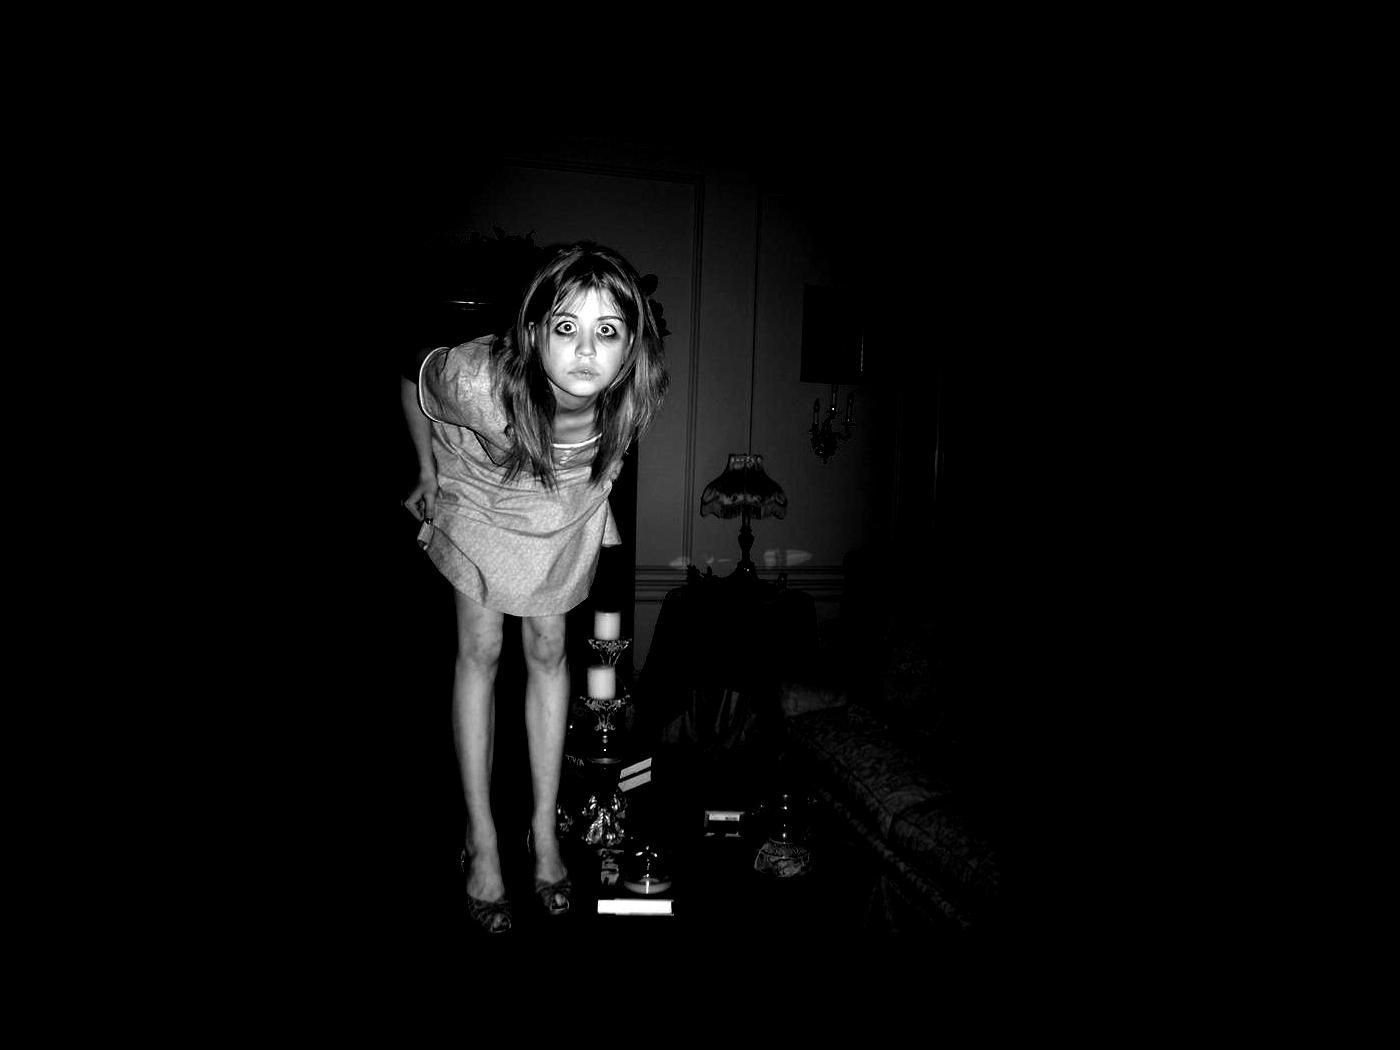 A girl stands in a dark room, holding a light. - Creepy